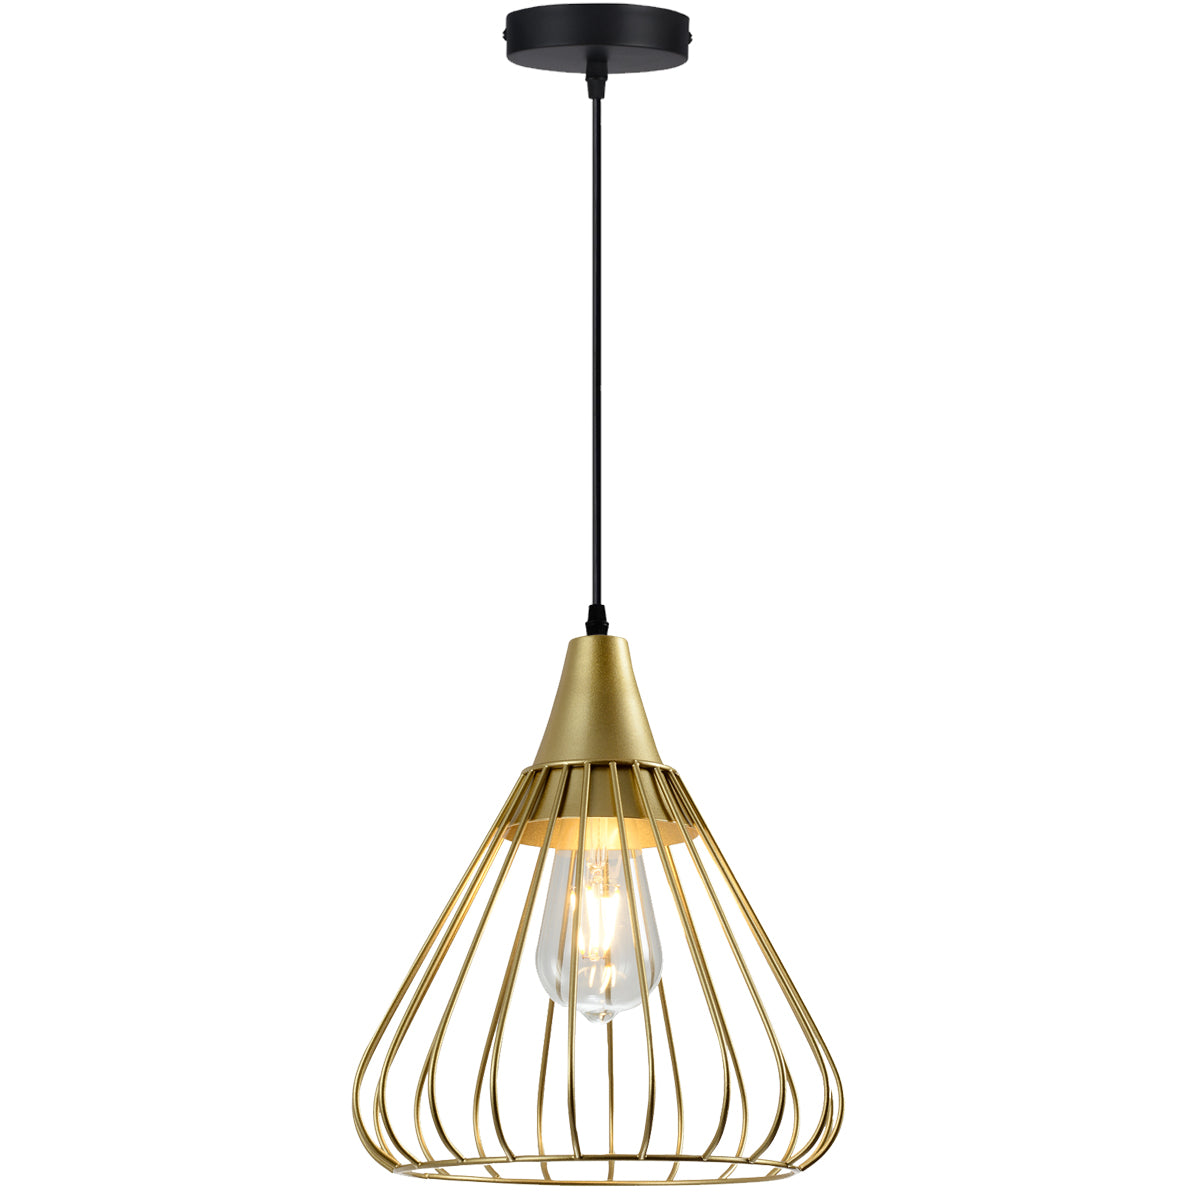 This classic light fitting a with large gold metal shade will perfectly fit into most home arrangements. The bulb hidden in a metal lampshade gives a very interesting visual effect when the light is turned on and the wires can be adjusted to your desired height.